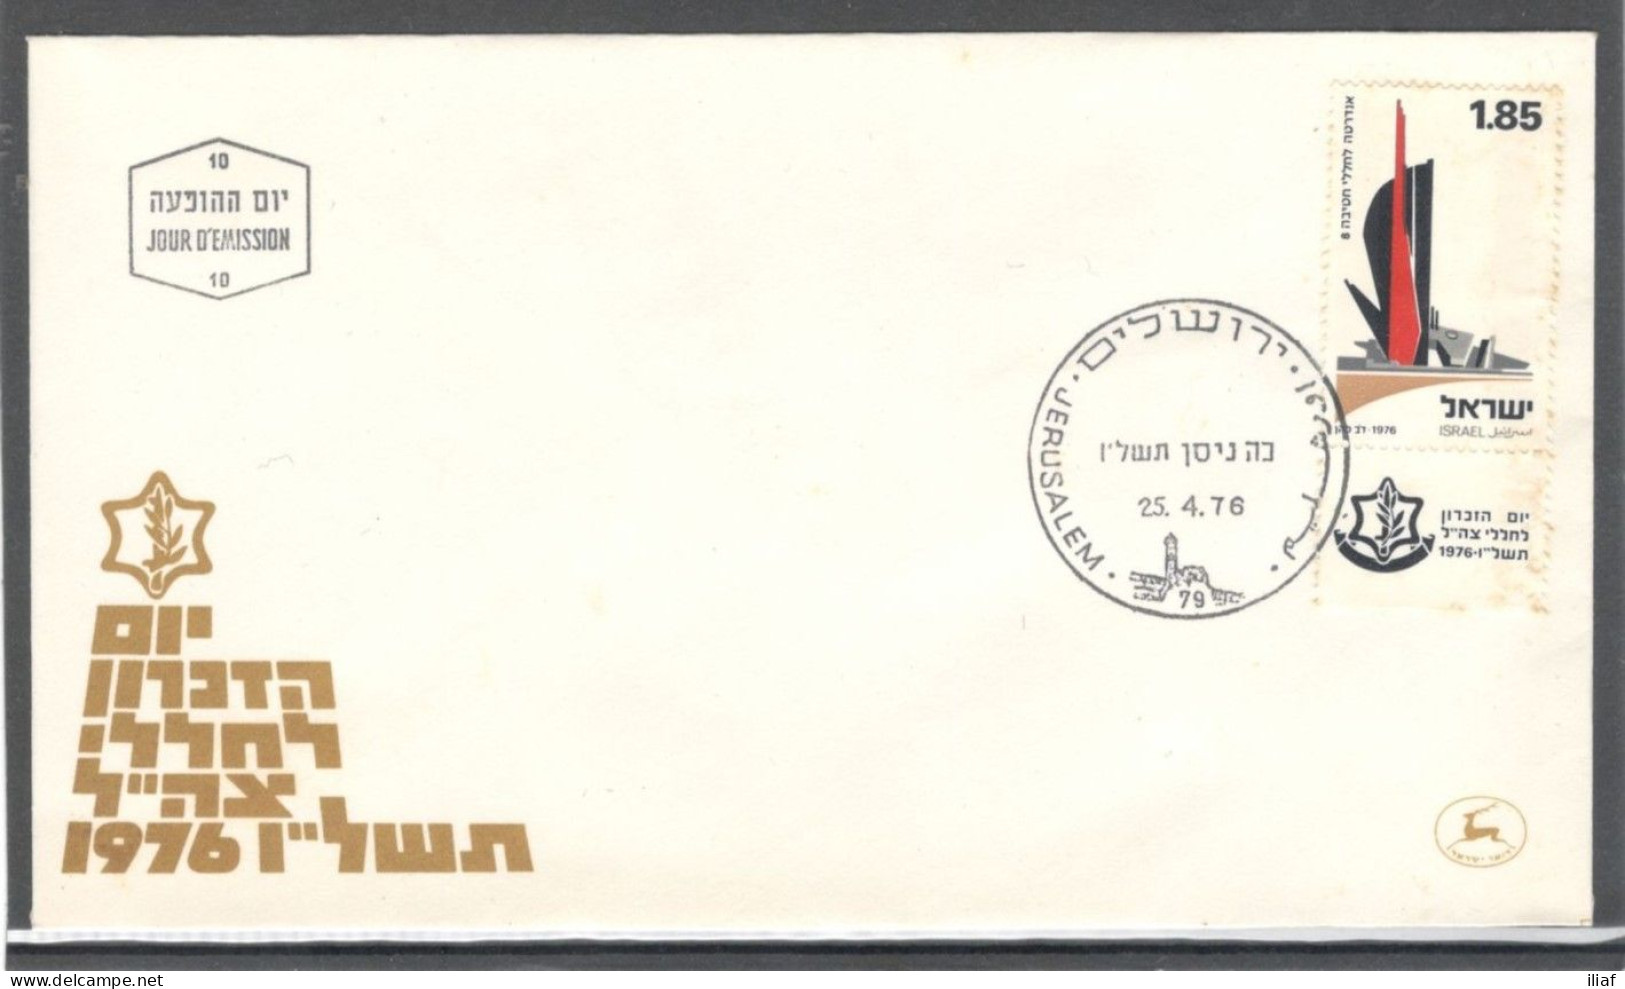 Israel 1976 FDC Sc. 600  MEMORIAL DAY 5736 (1976)  FDC Cancellation On Cachet FDC Envelope - FDC